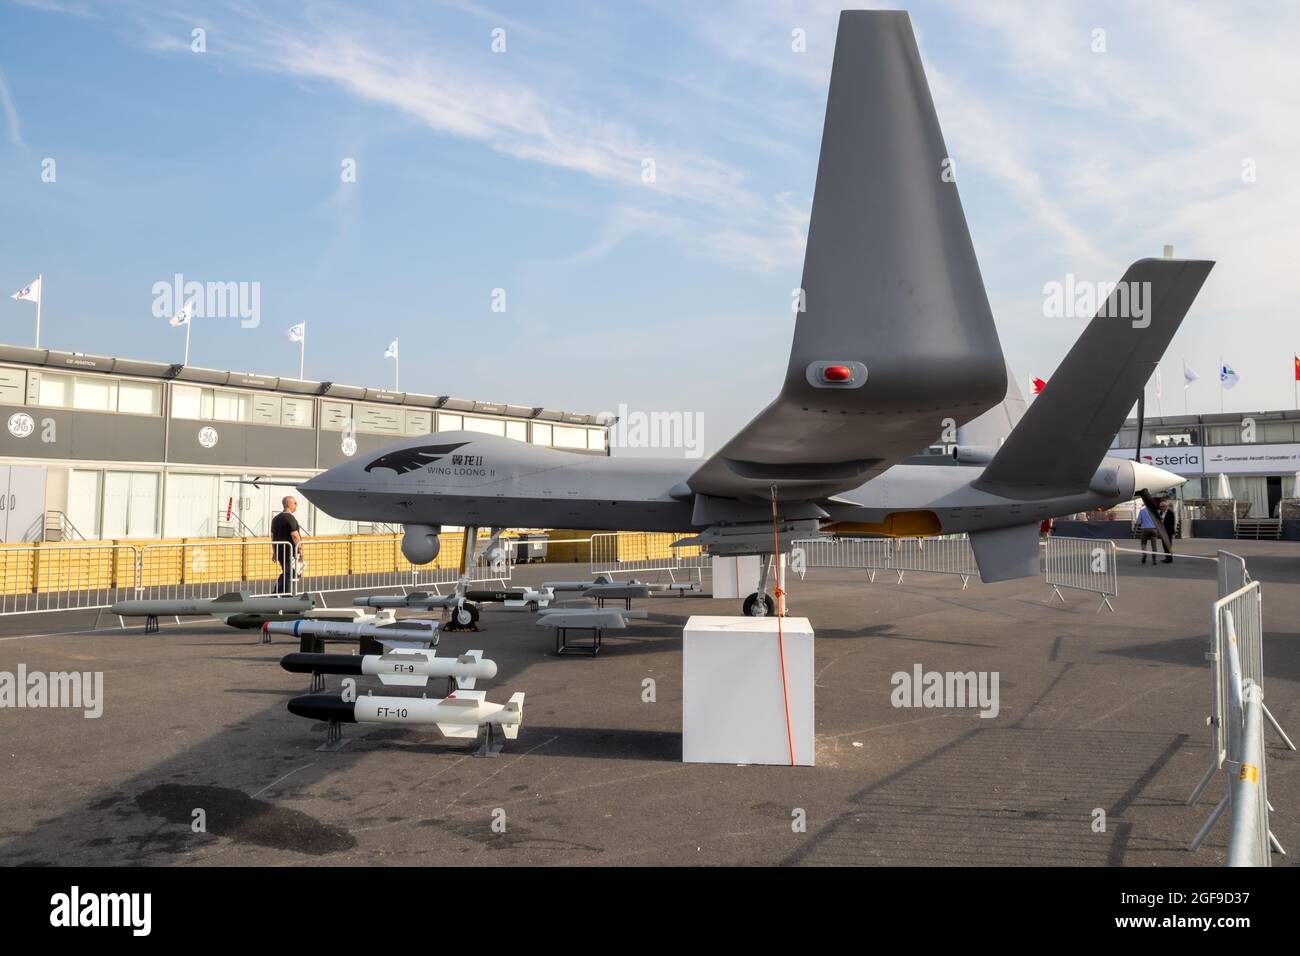 Chinese Chengdu Aircraft Industry Group (CAIG) Wing Loong II  military UAV drone showcased at Paris Air Show, France - June 22, 2017 Stock Photo